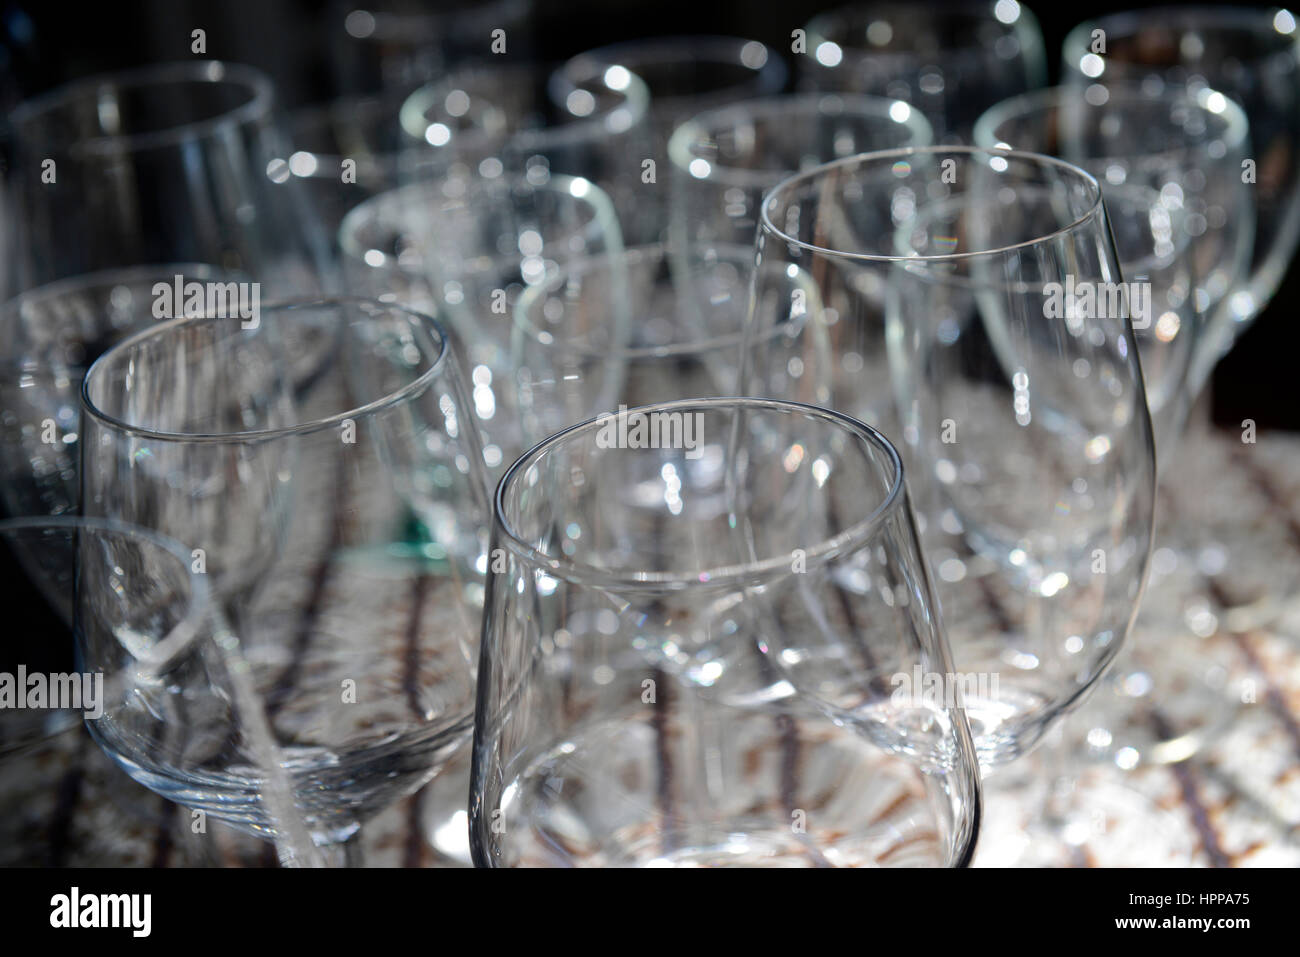 Wine Glasses set out for a dinner party. Stock Photo